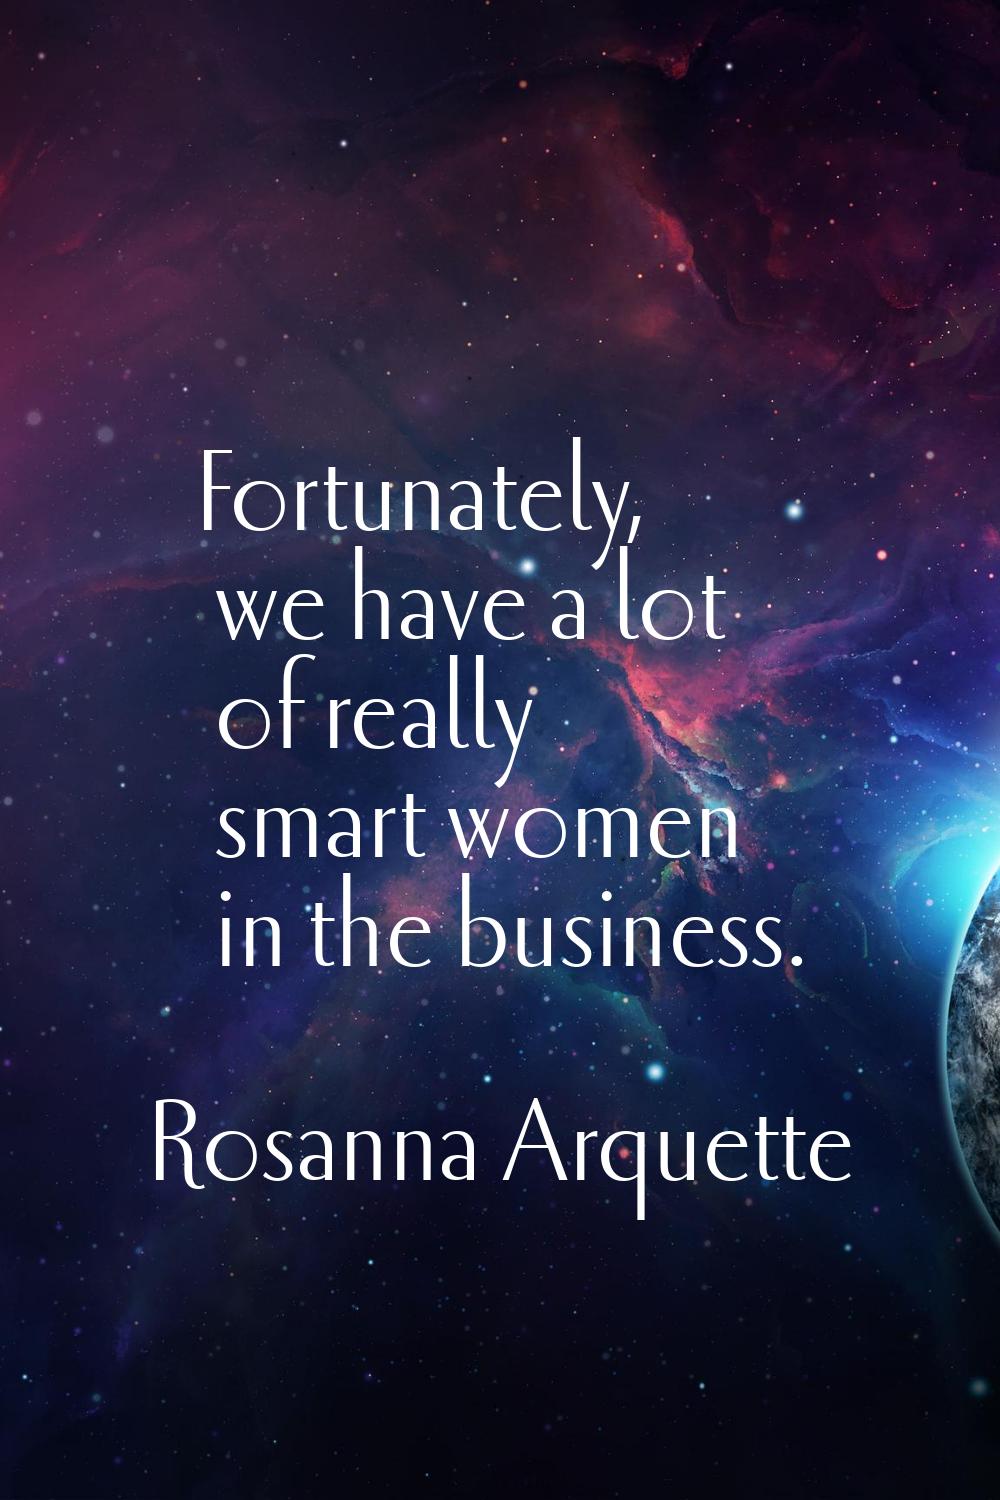 Fortunately, we have a lot of really smart women in the business.